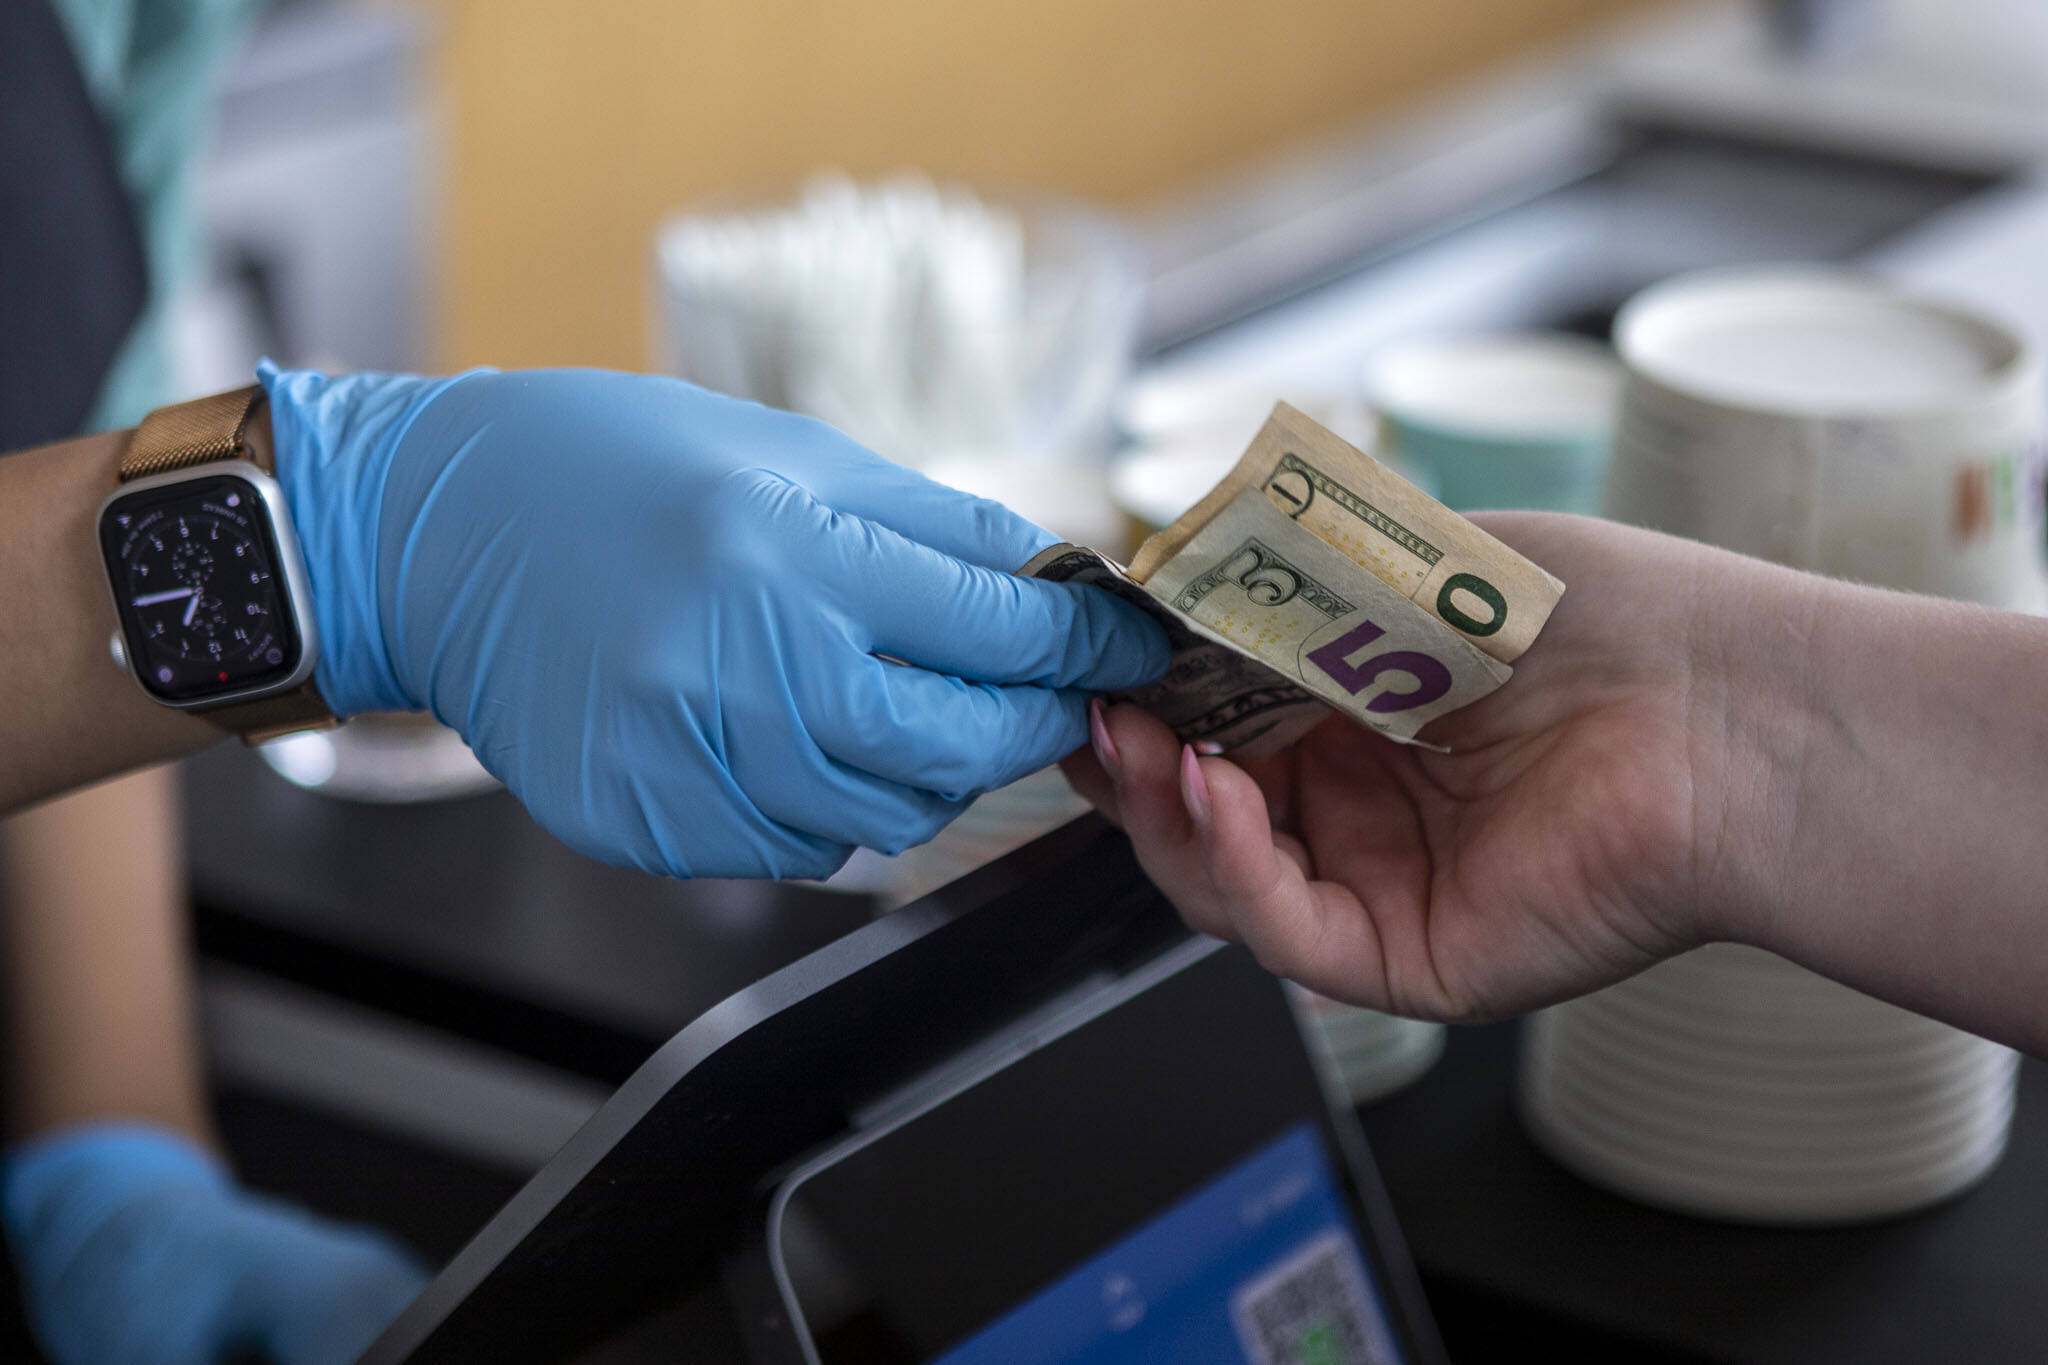 Cash is used for a purchase at Molly Moon's Ice Cream in Edmonds, Washington on Wednesday, Aug. 30, 2023. (Annie Barker / The Herald)